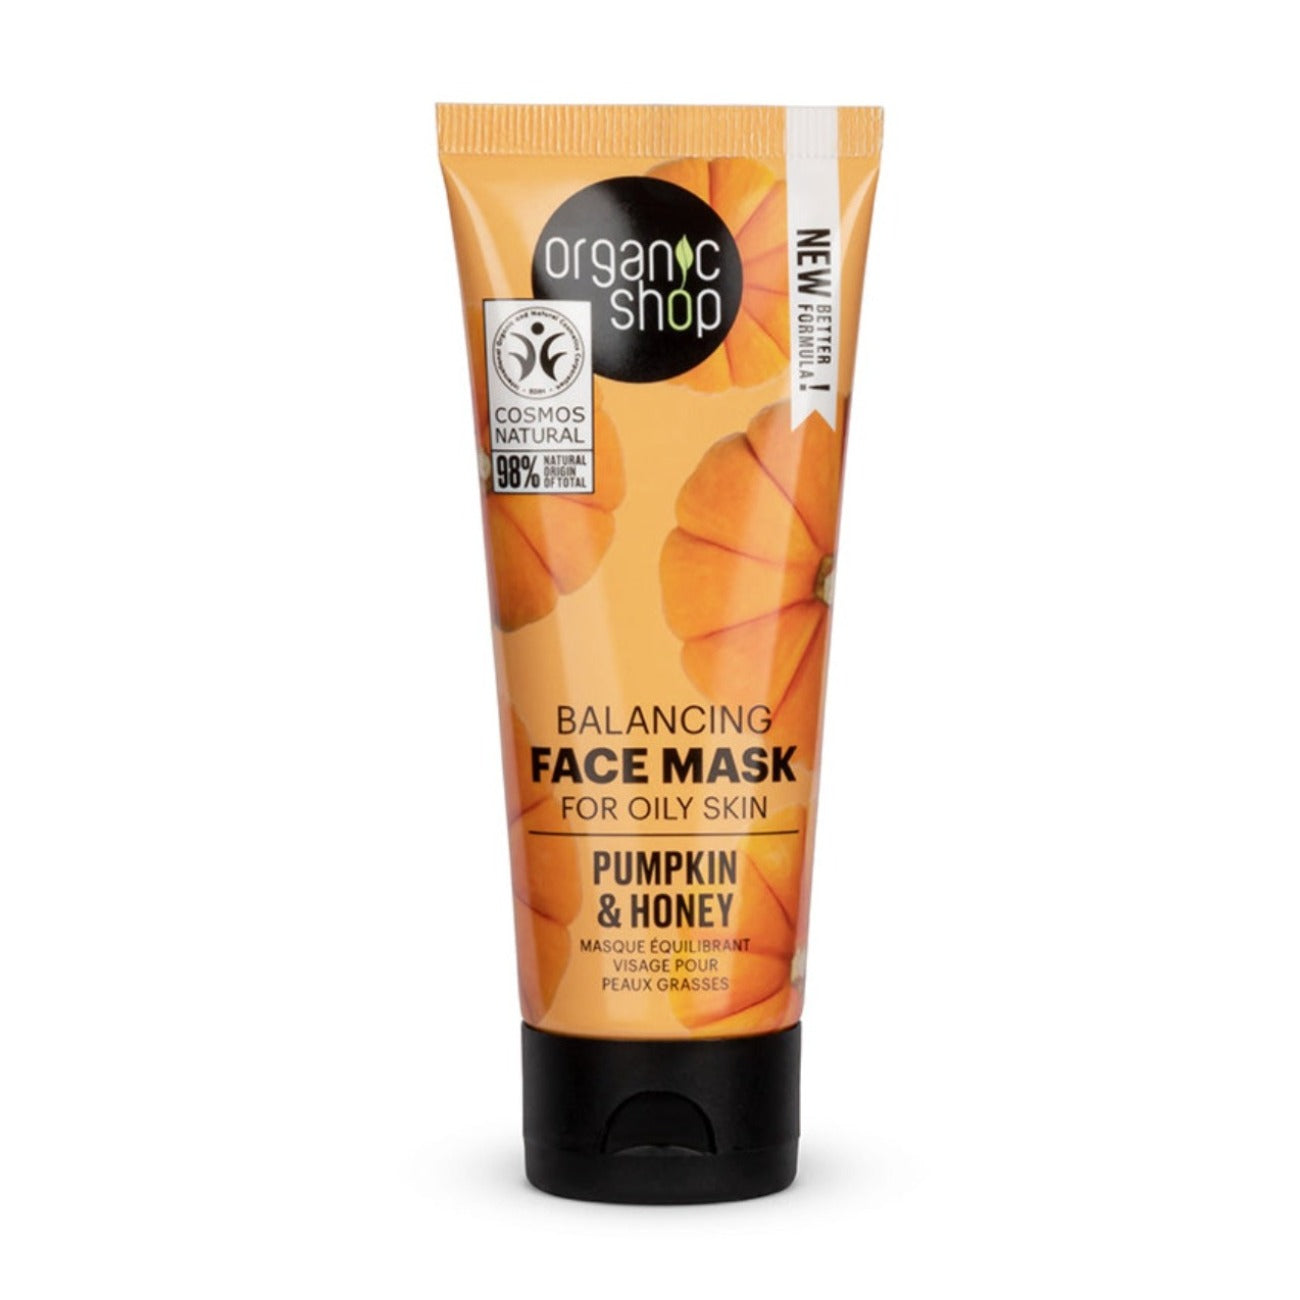 Pumpkin and Honey Balancing Face Mask for Oily Skin 75ml